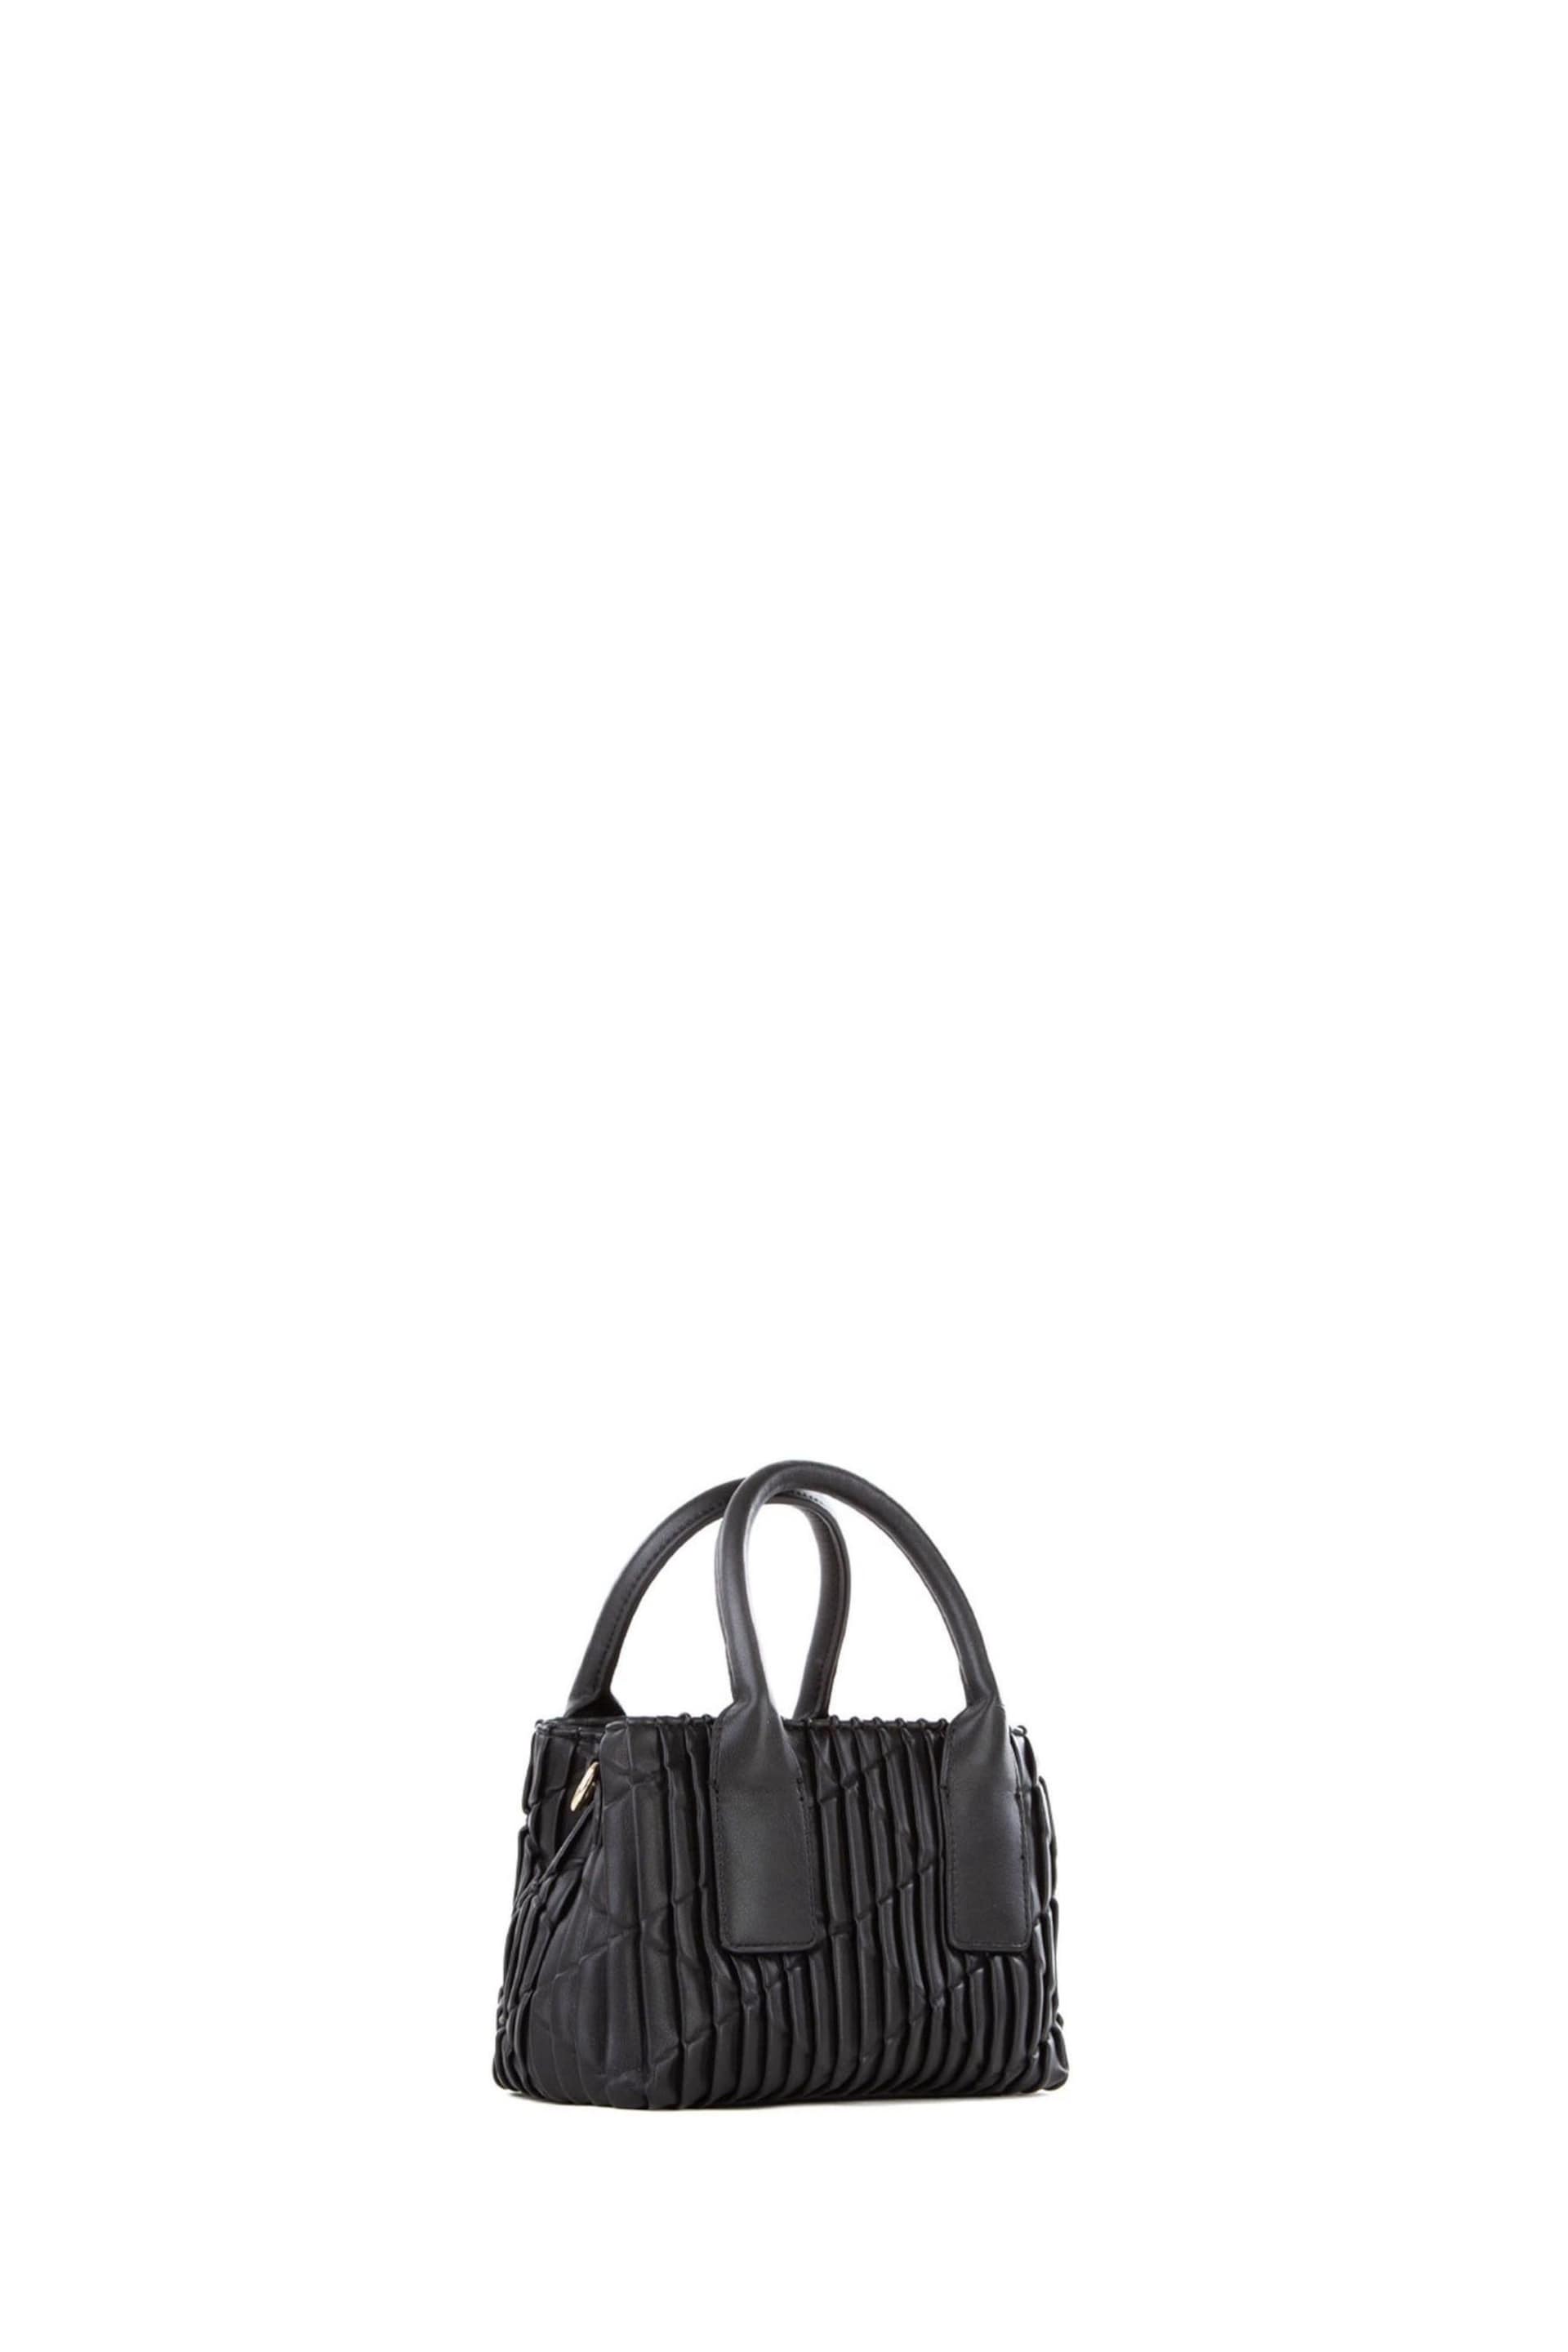 Valentino Bags Black Clapham Chain Strap Top Handle Bag - Image 2 of 5